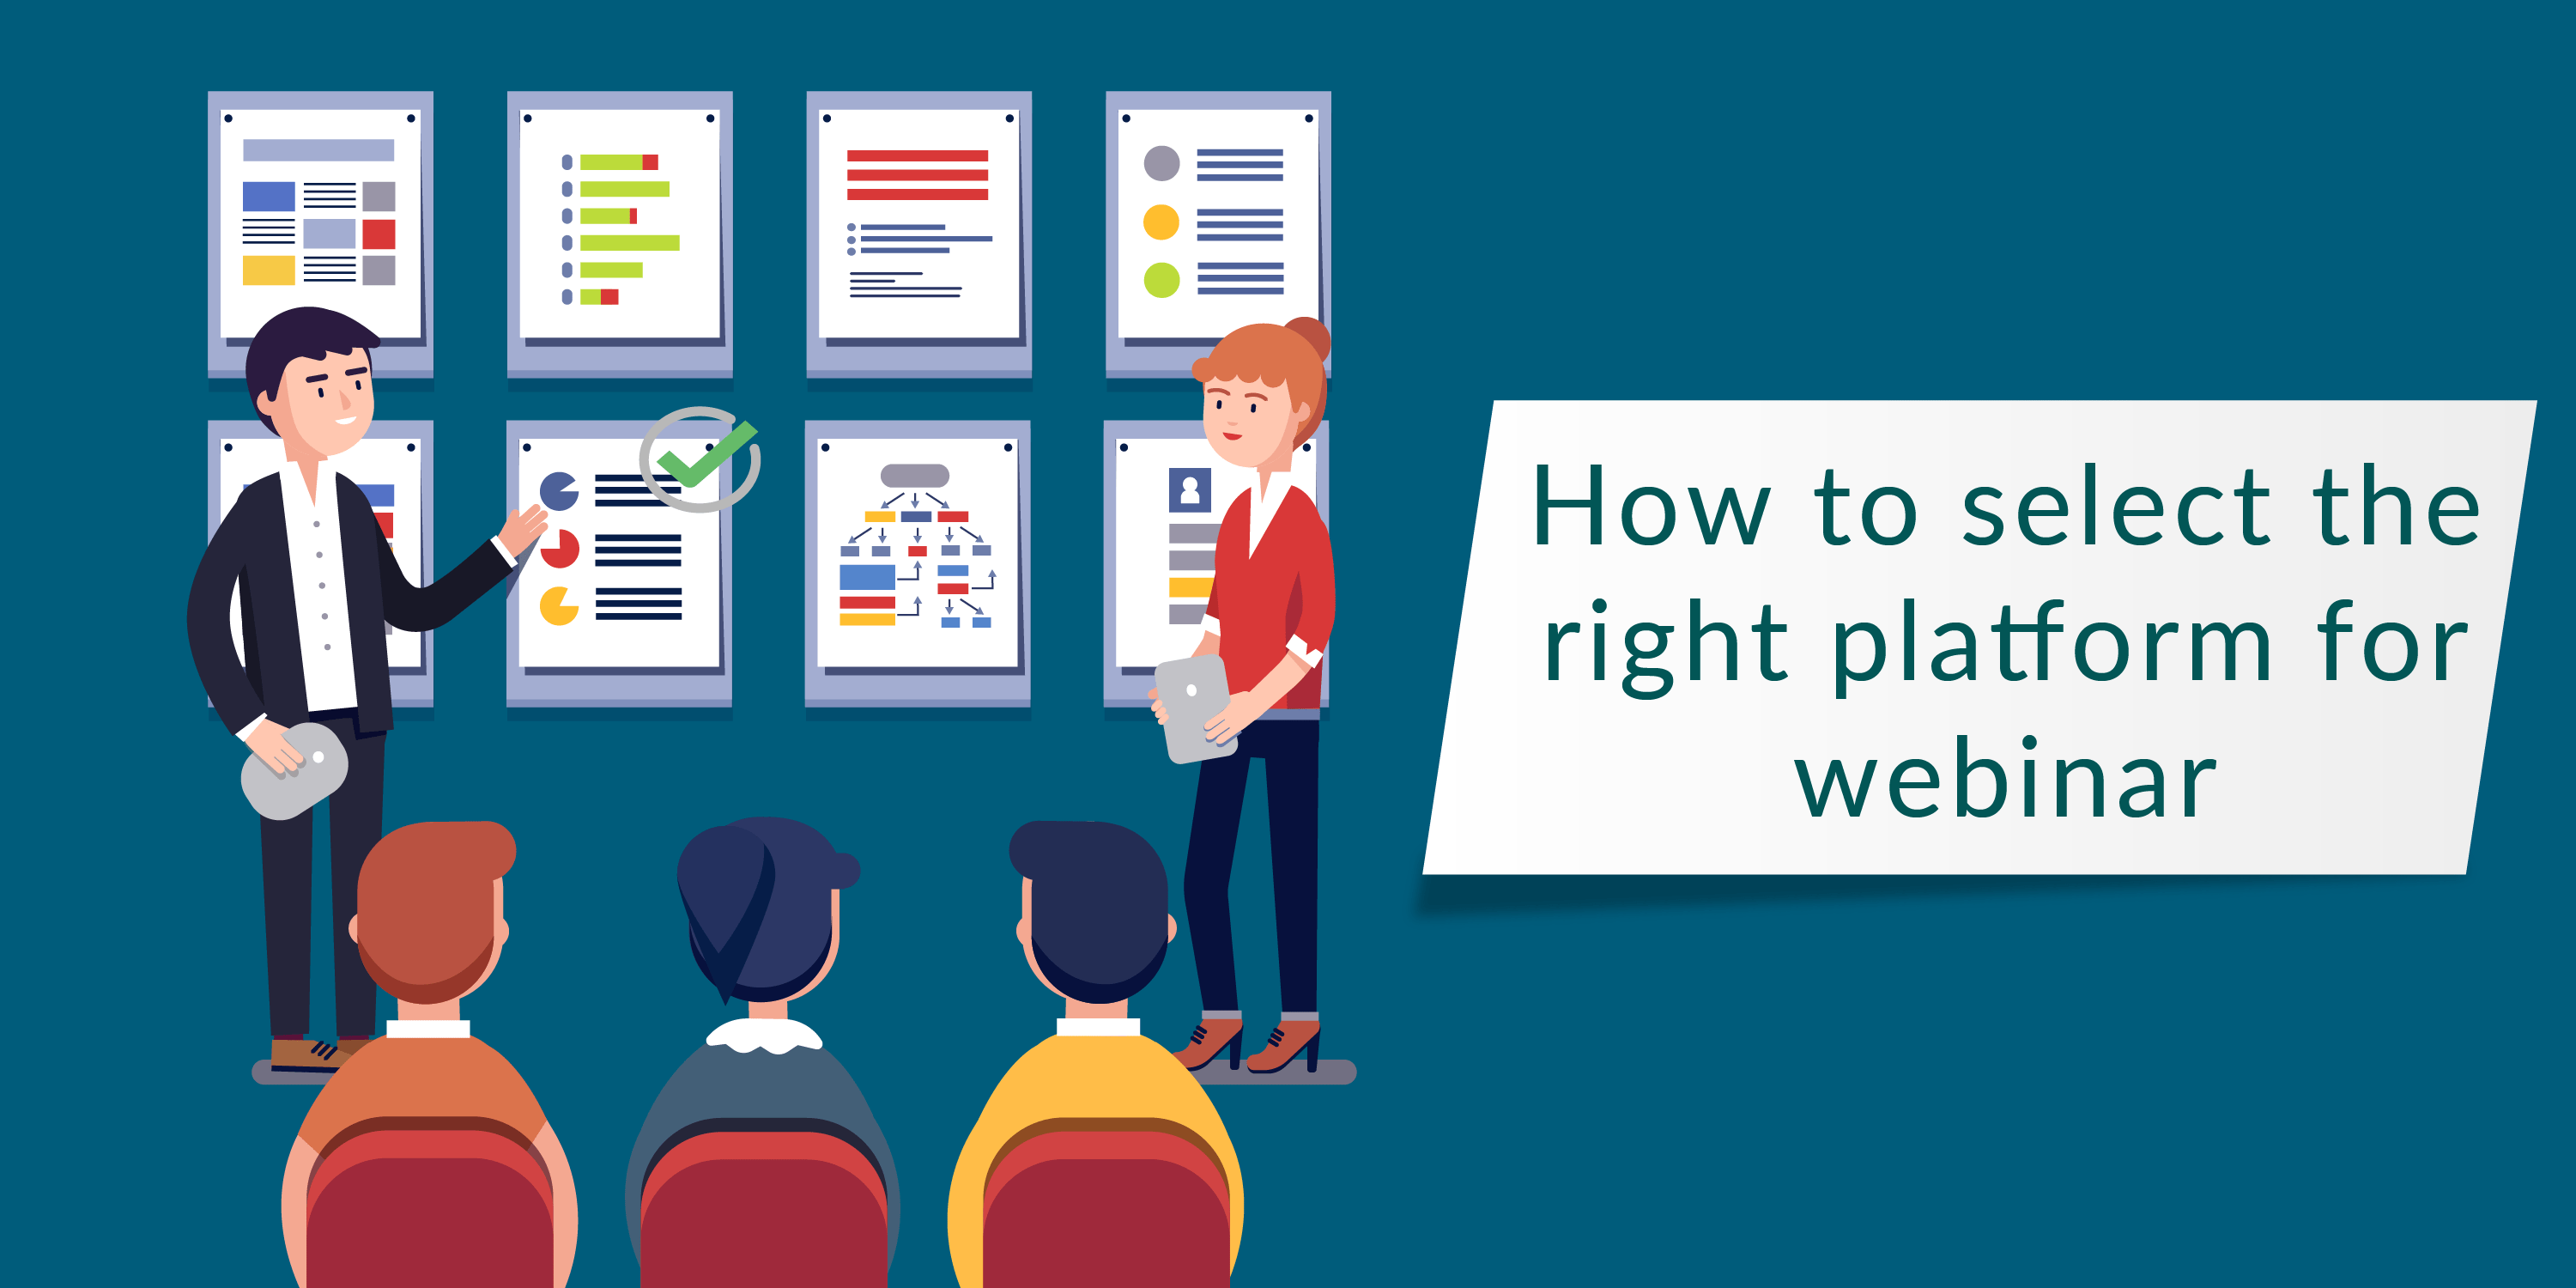 HOW TO SELECT THE RIGHT PLATFORM FOR WEBINAR